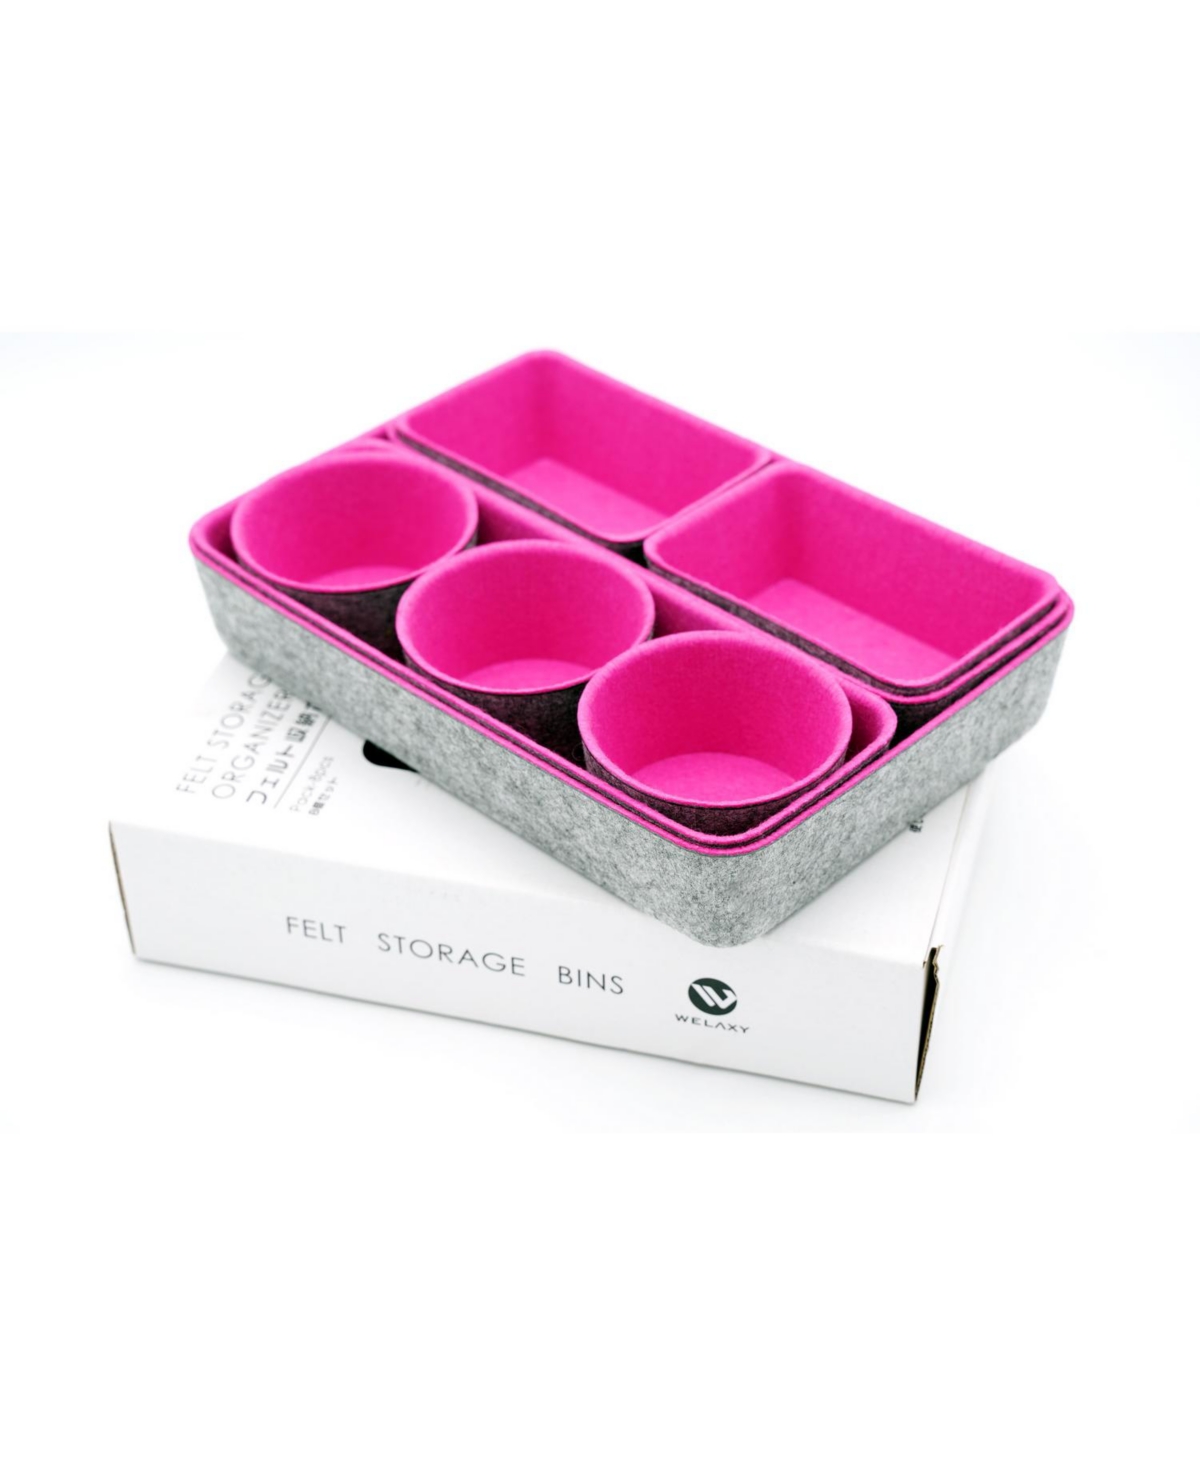 8 Piece Felt Drawer Organizer Set with Round Cups and Trays - Hot Pink